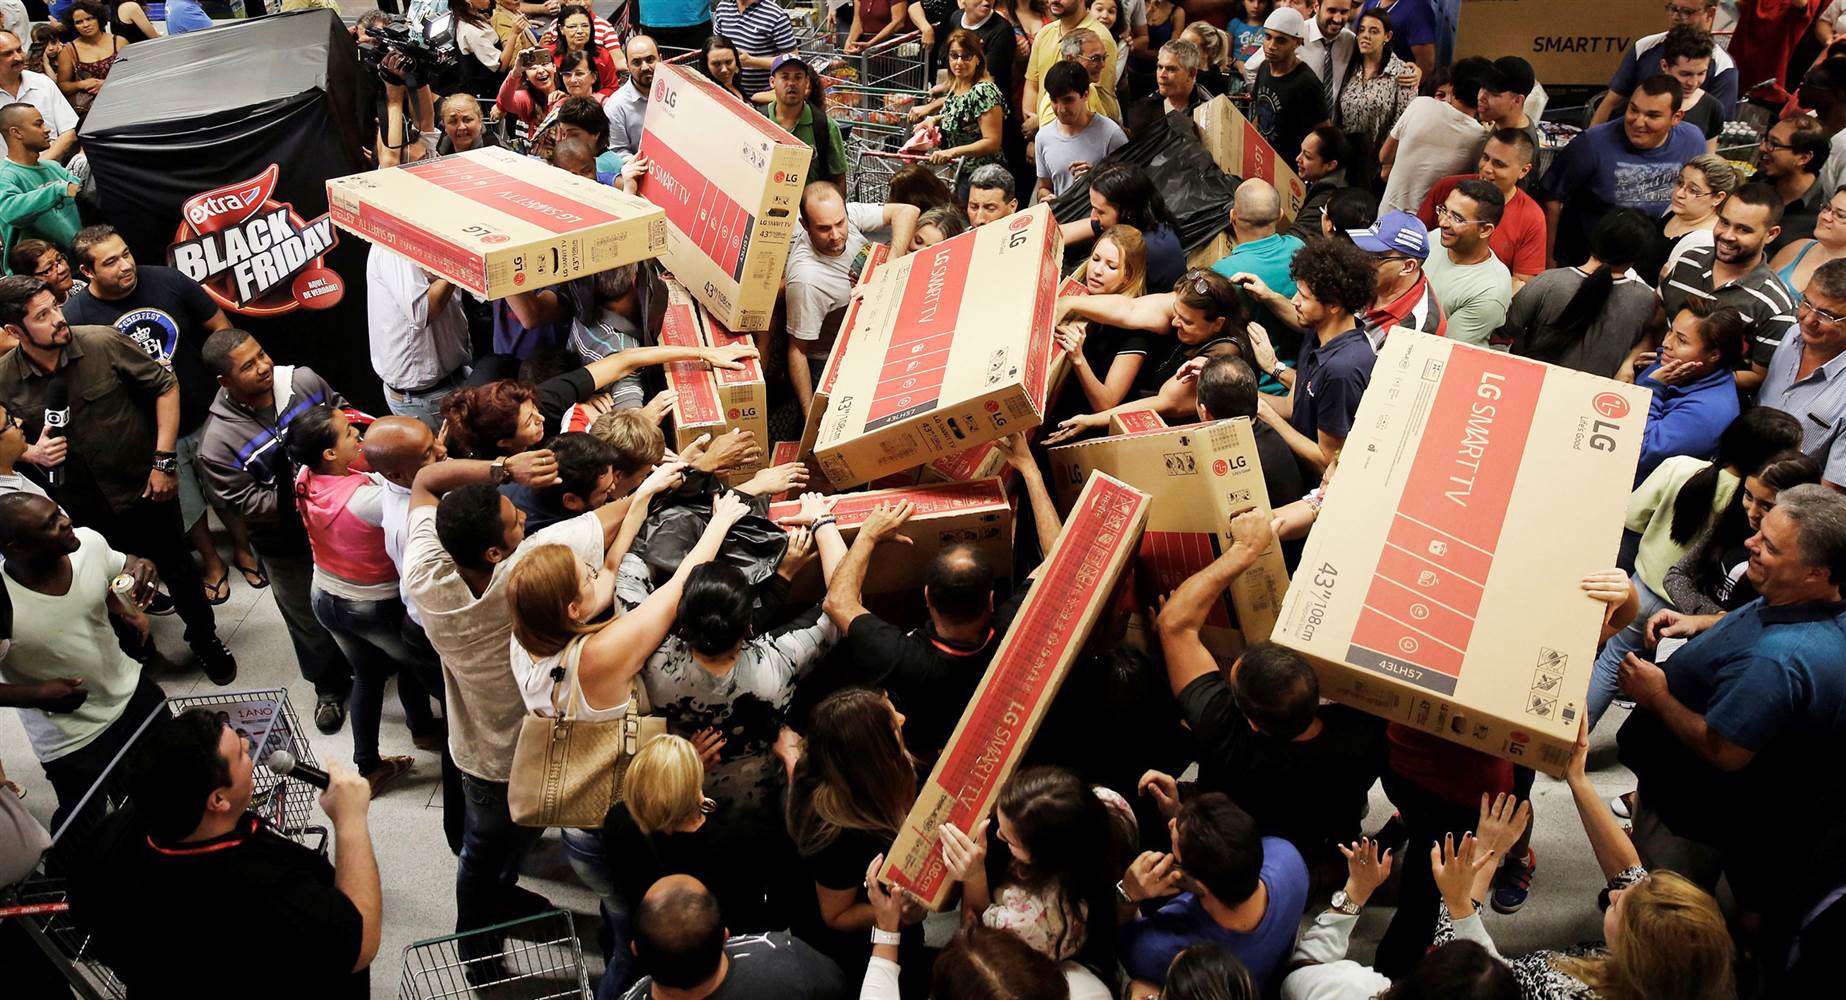 Today marks the start of growing Black Friday bonanza